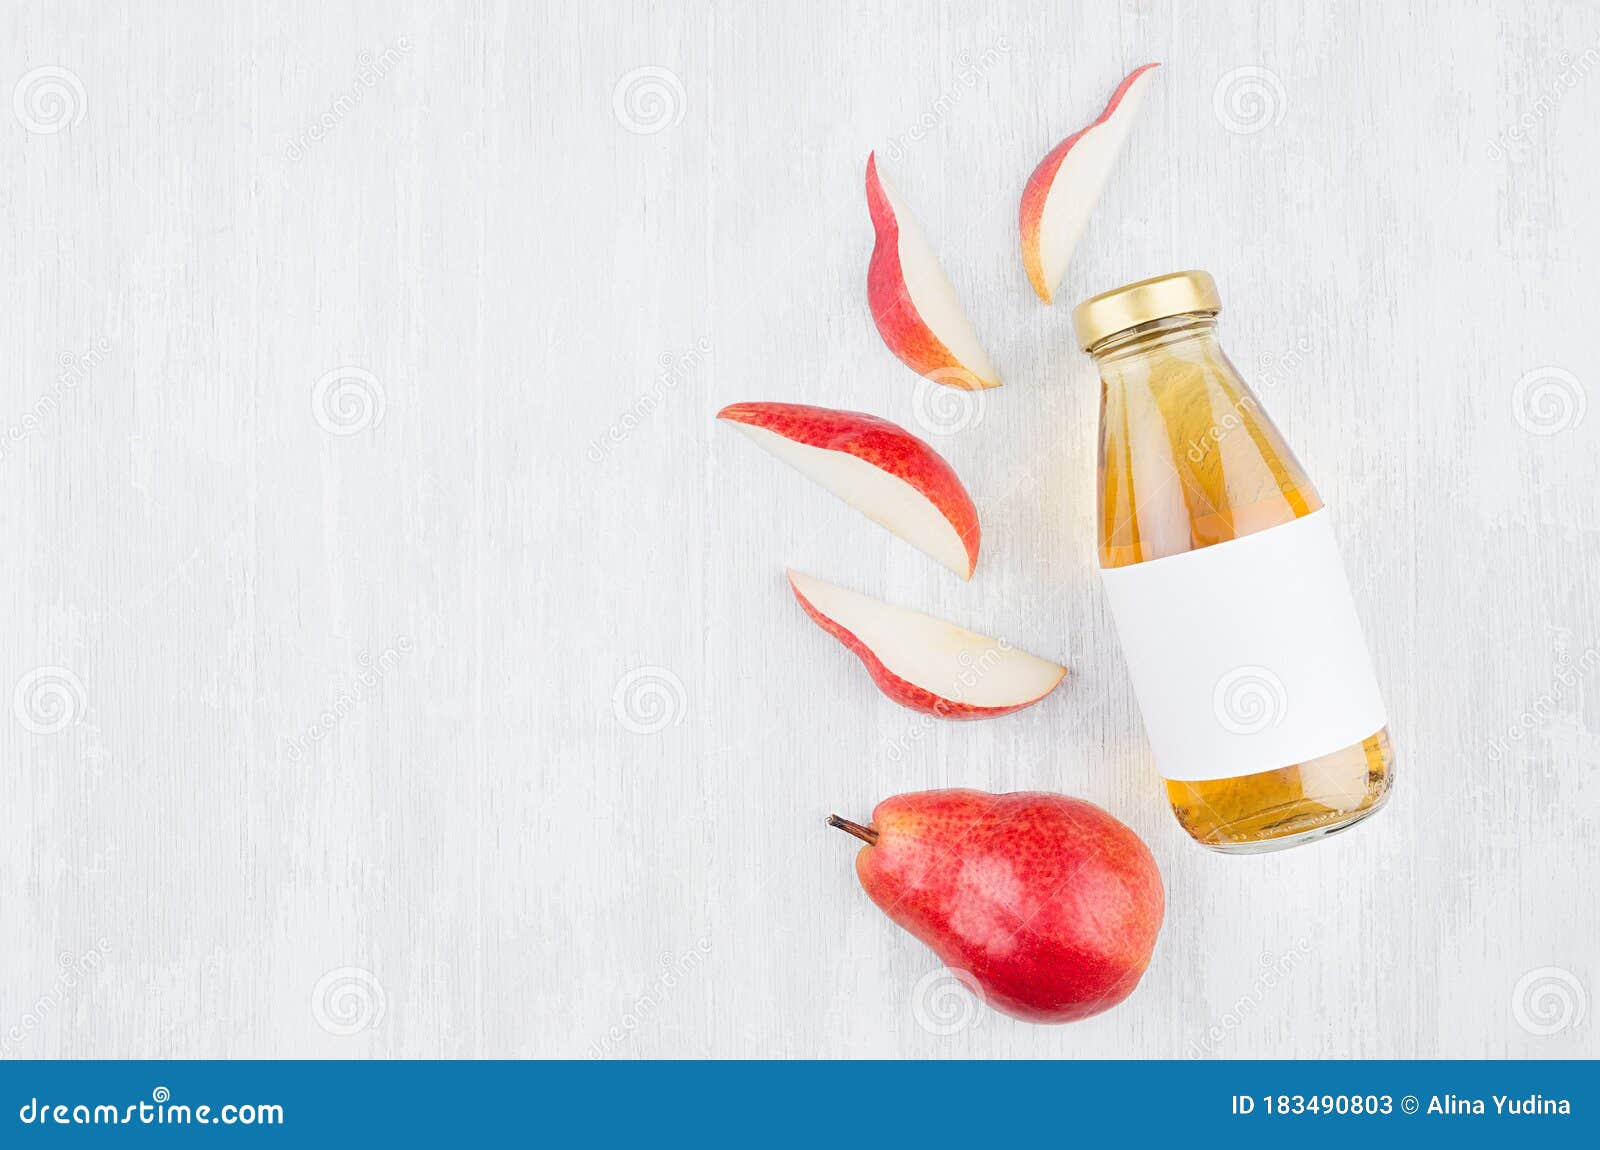 Download Bright Transparent Yellow Pear Juice In Glass Bottle As Template For Design And Advertising With Blank Label On White Wood Stock Image Image Of Label Advertising 183490803 Yellowimages Mockups